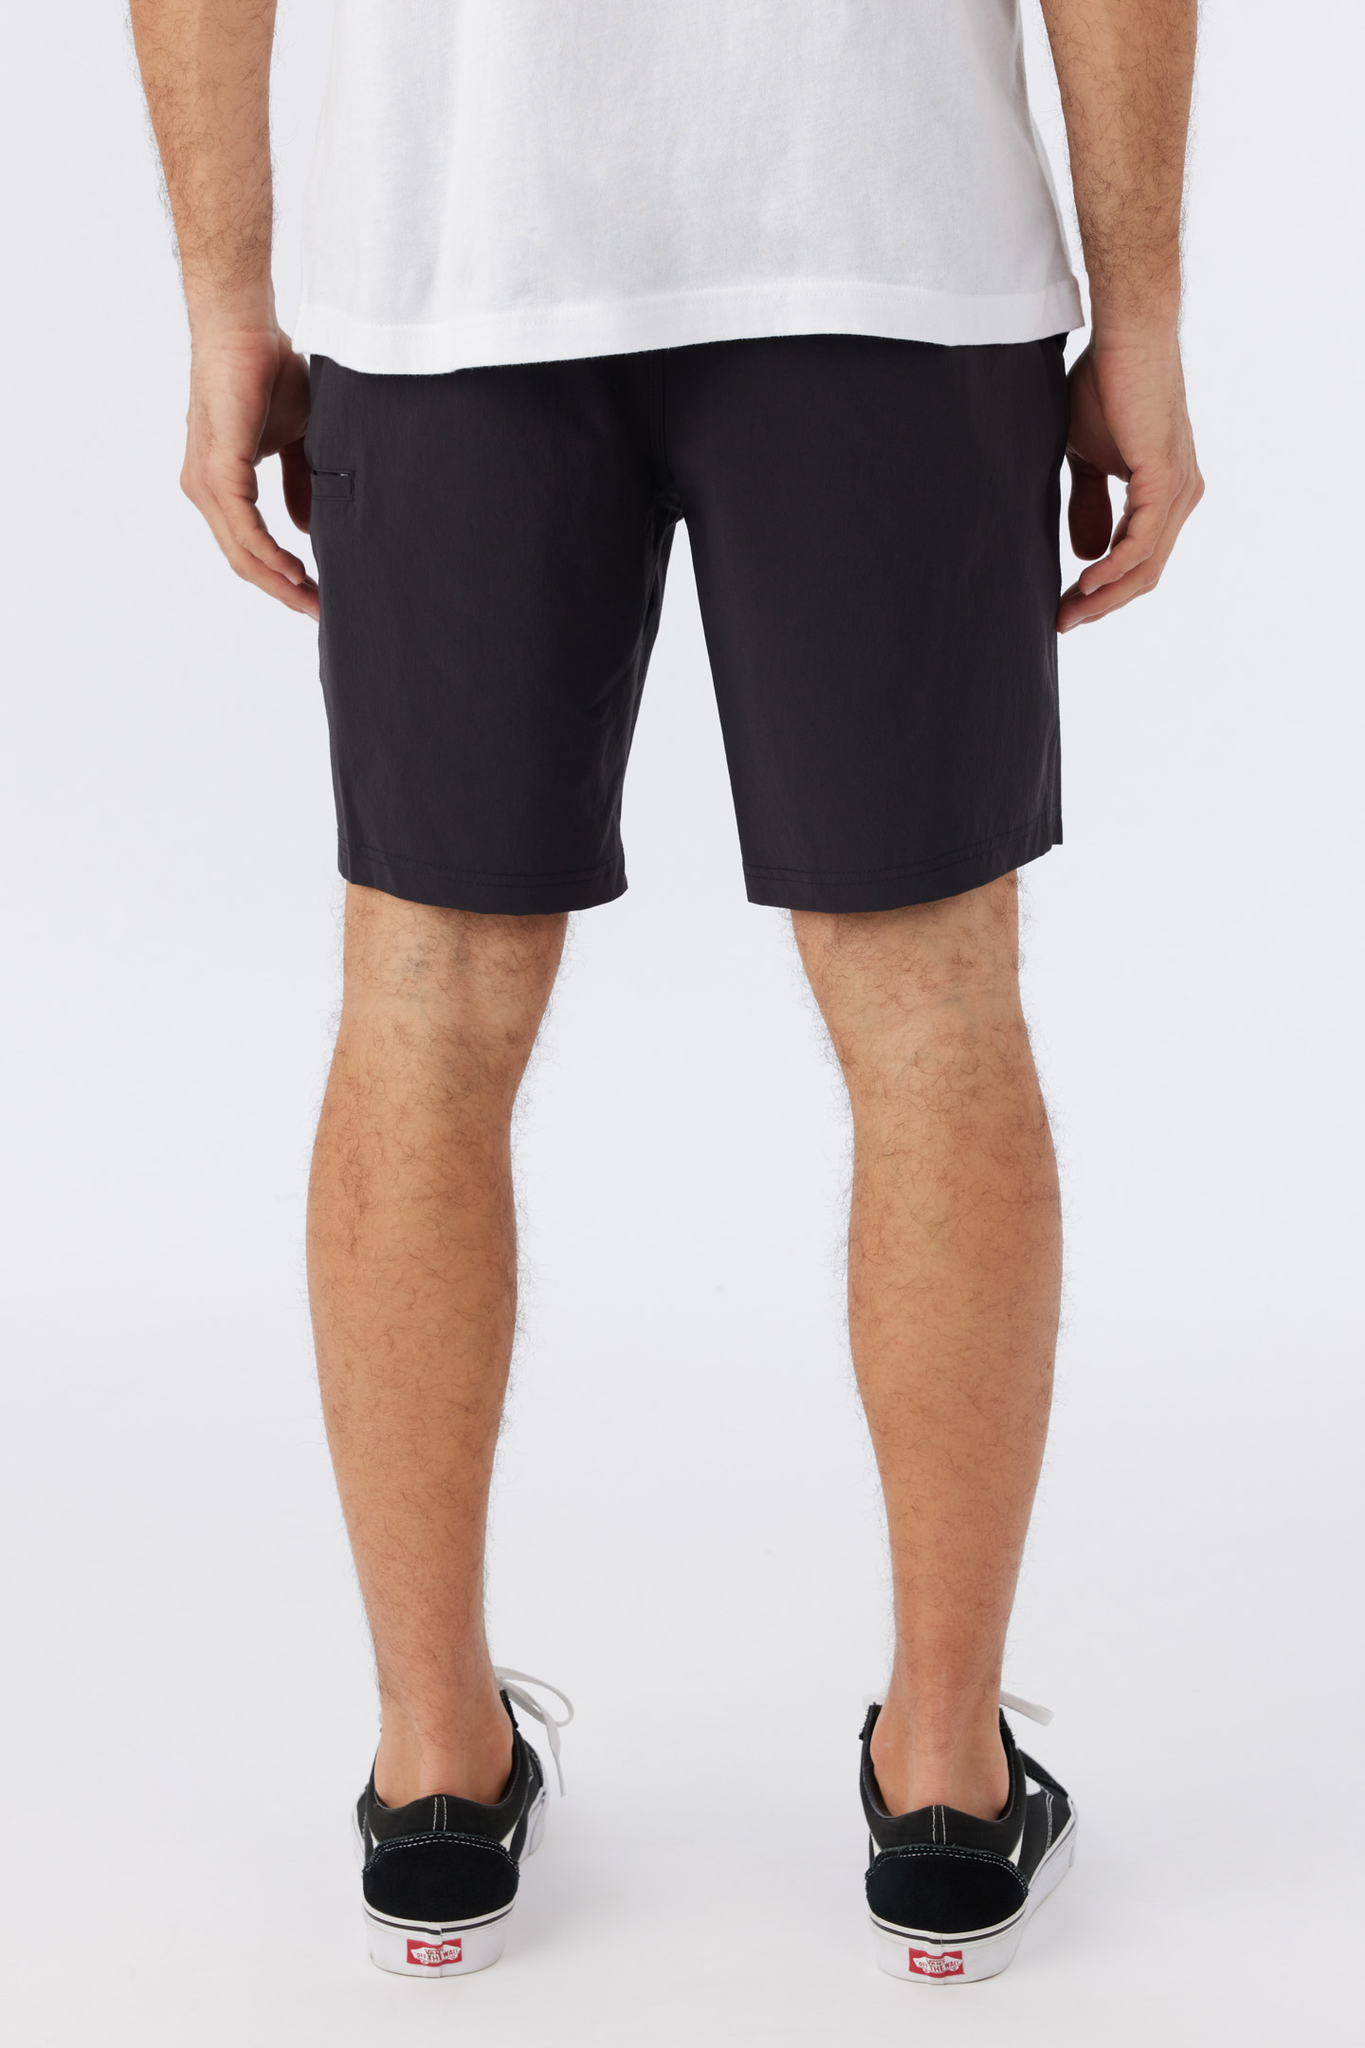 EAST CLIFF EXPEDITION 19" HYBRID SHORTS